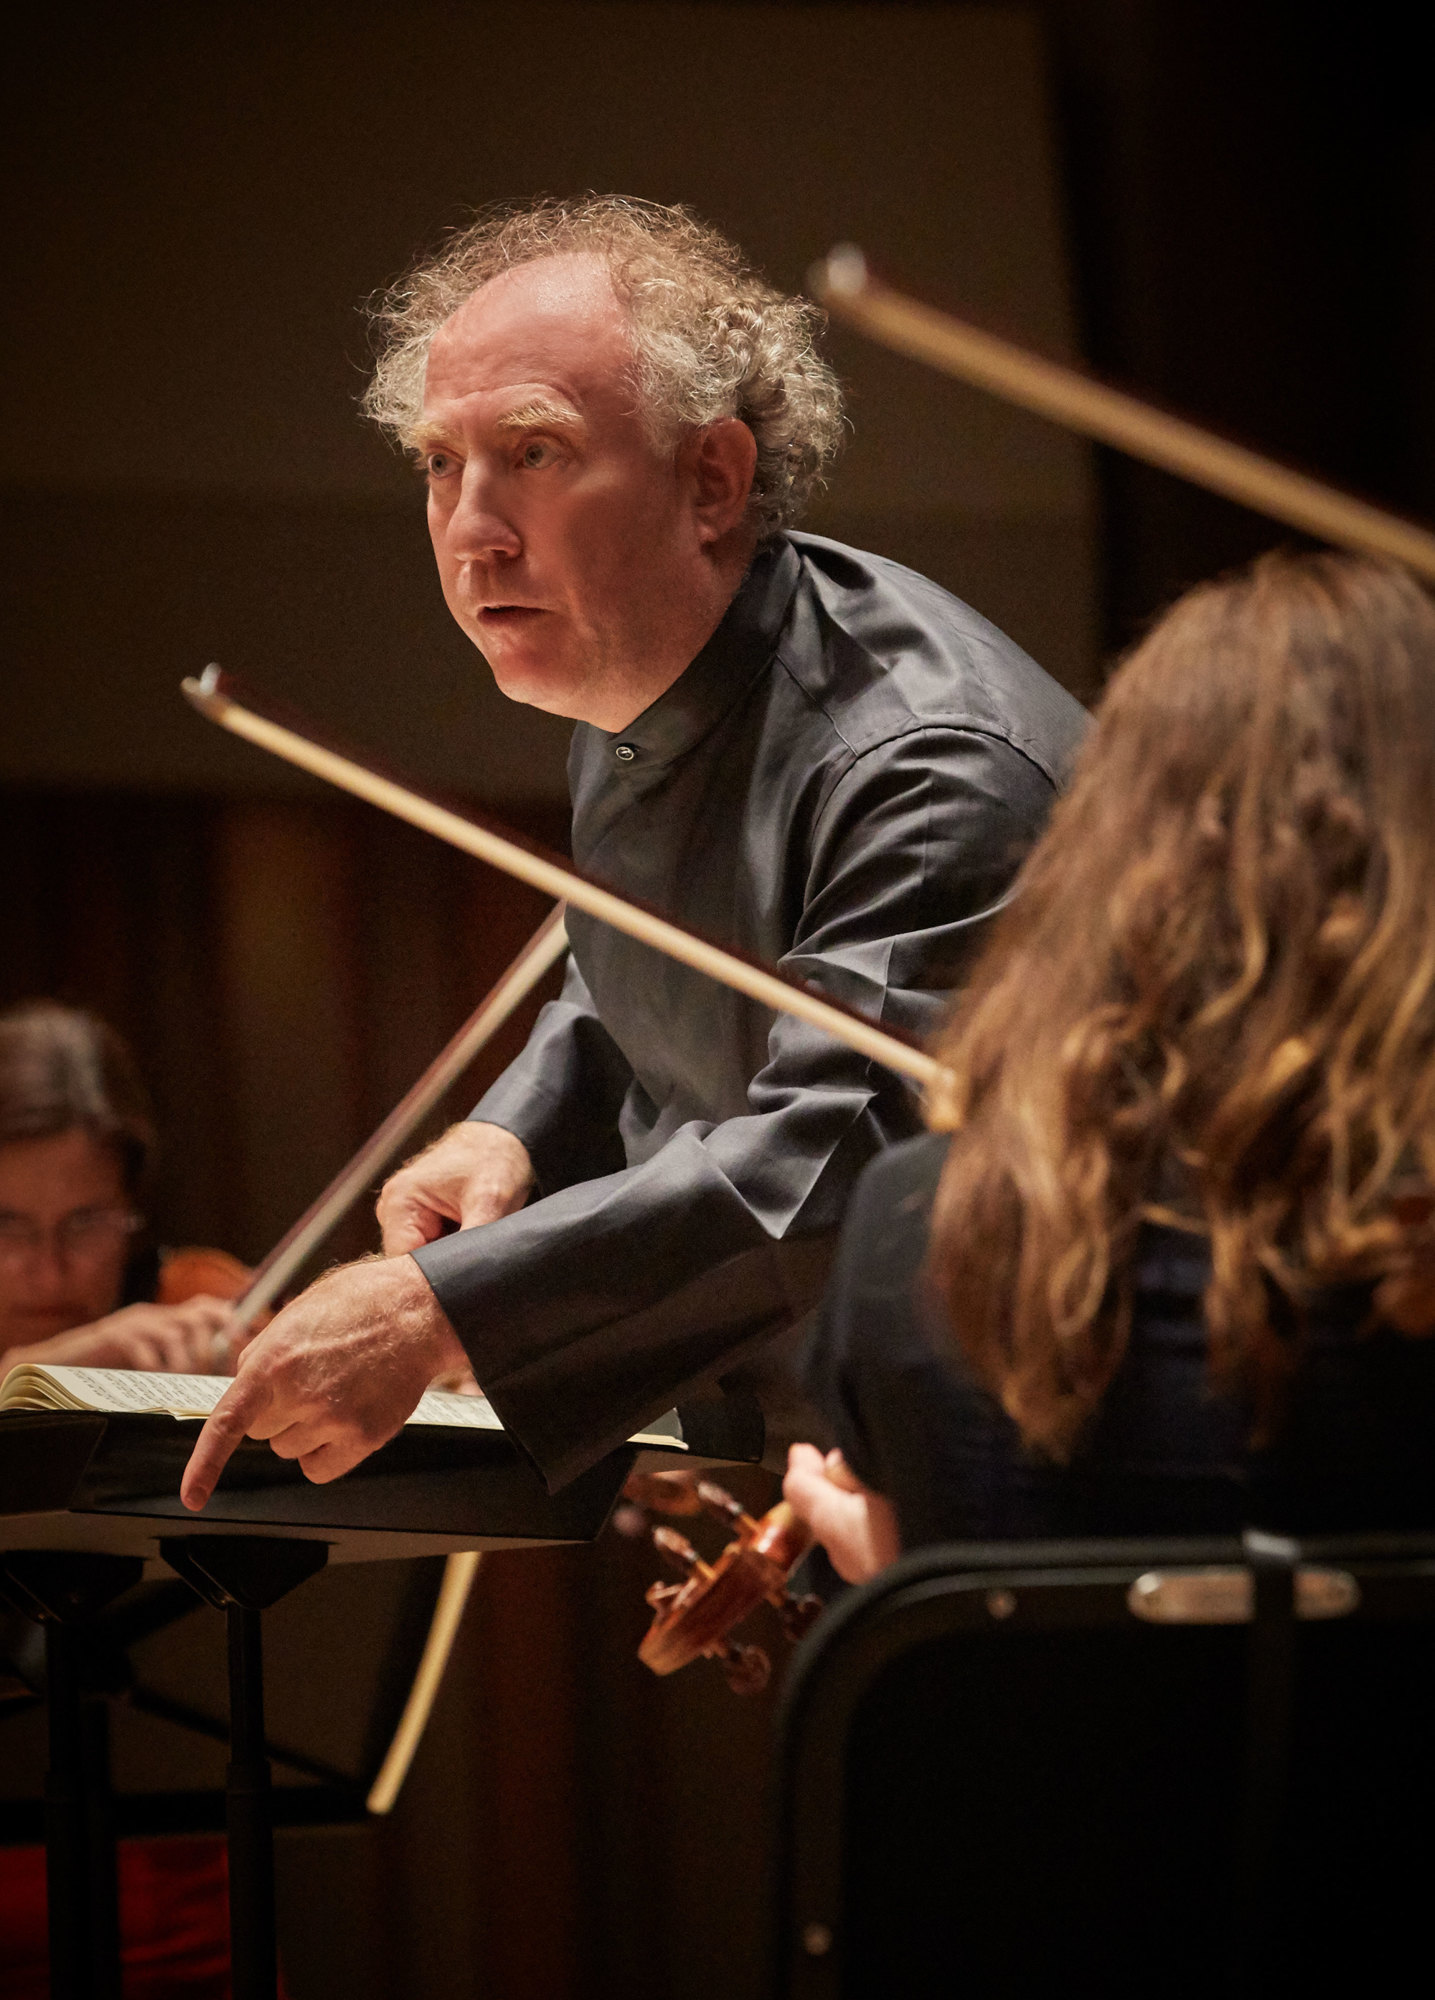 This is Jeffrey Kahane’s second year as music director for the festival. Courtesy photo